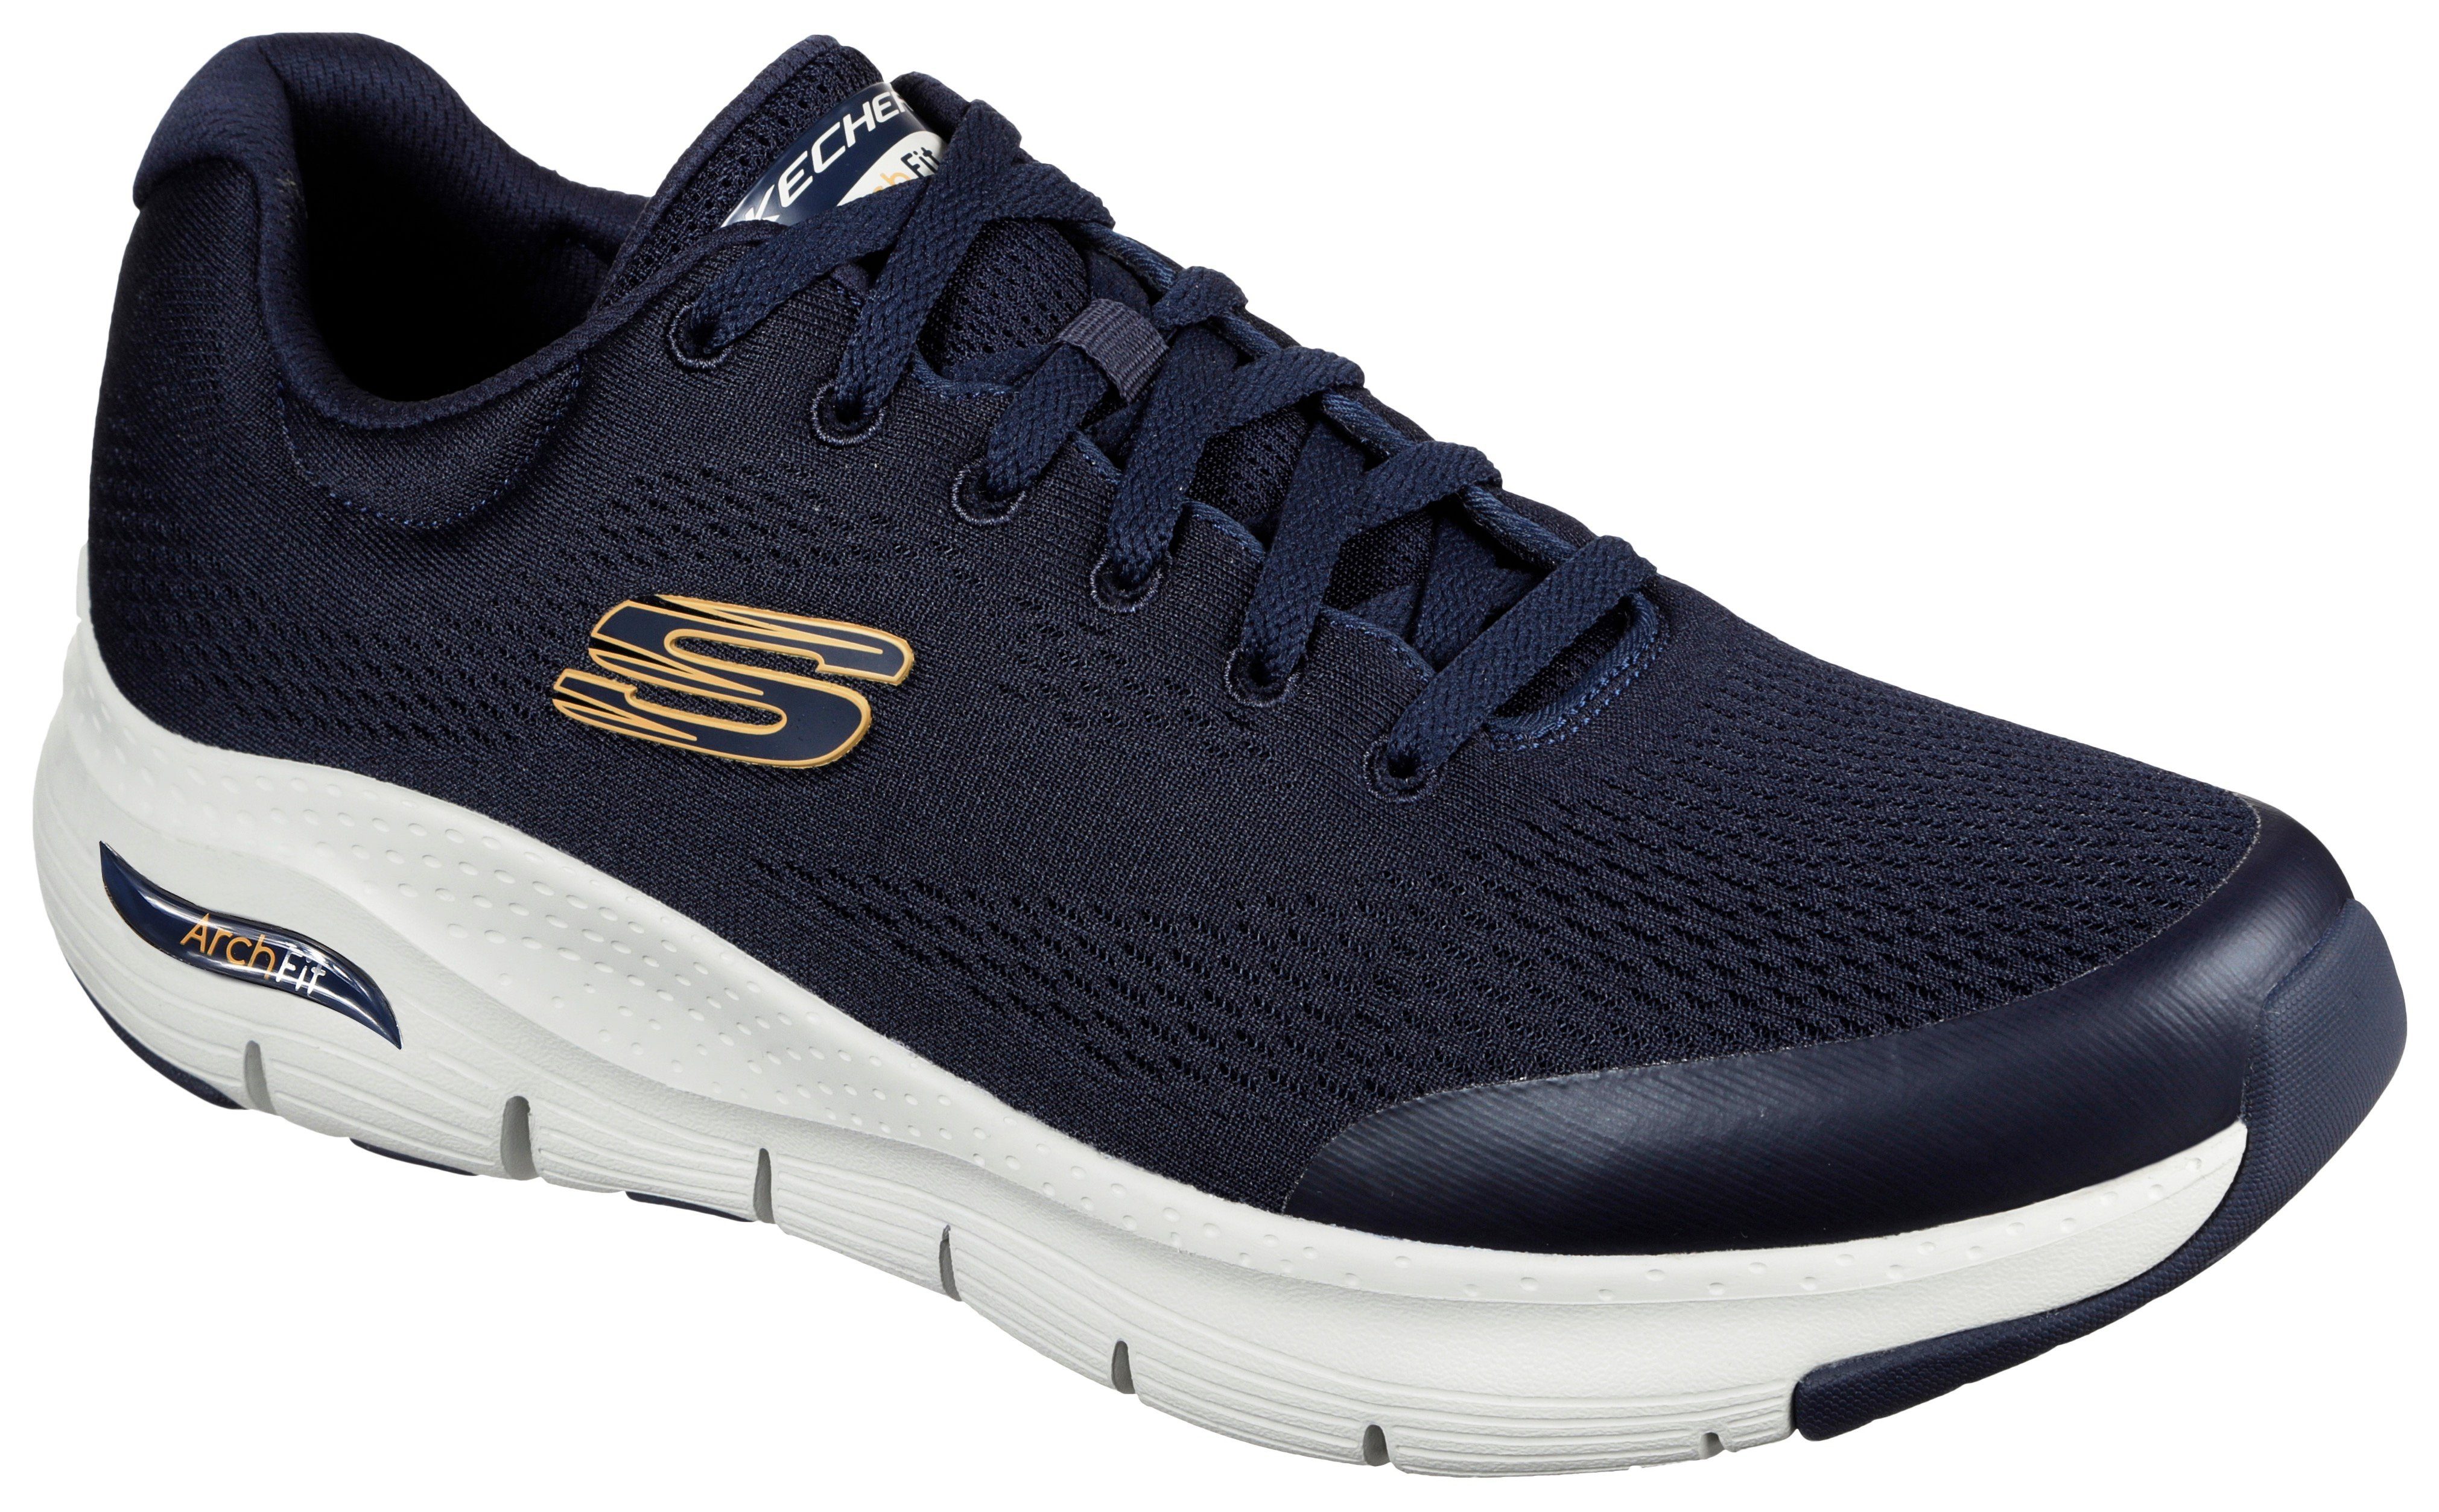 Skechers ARCH FIT navy Arch Fit-Innensohle mit Sneaker